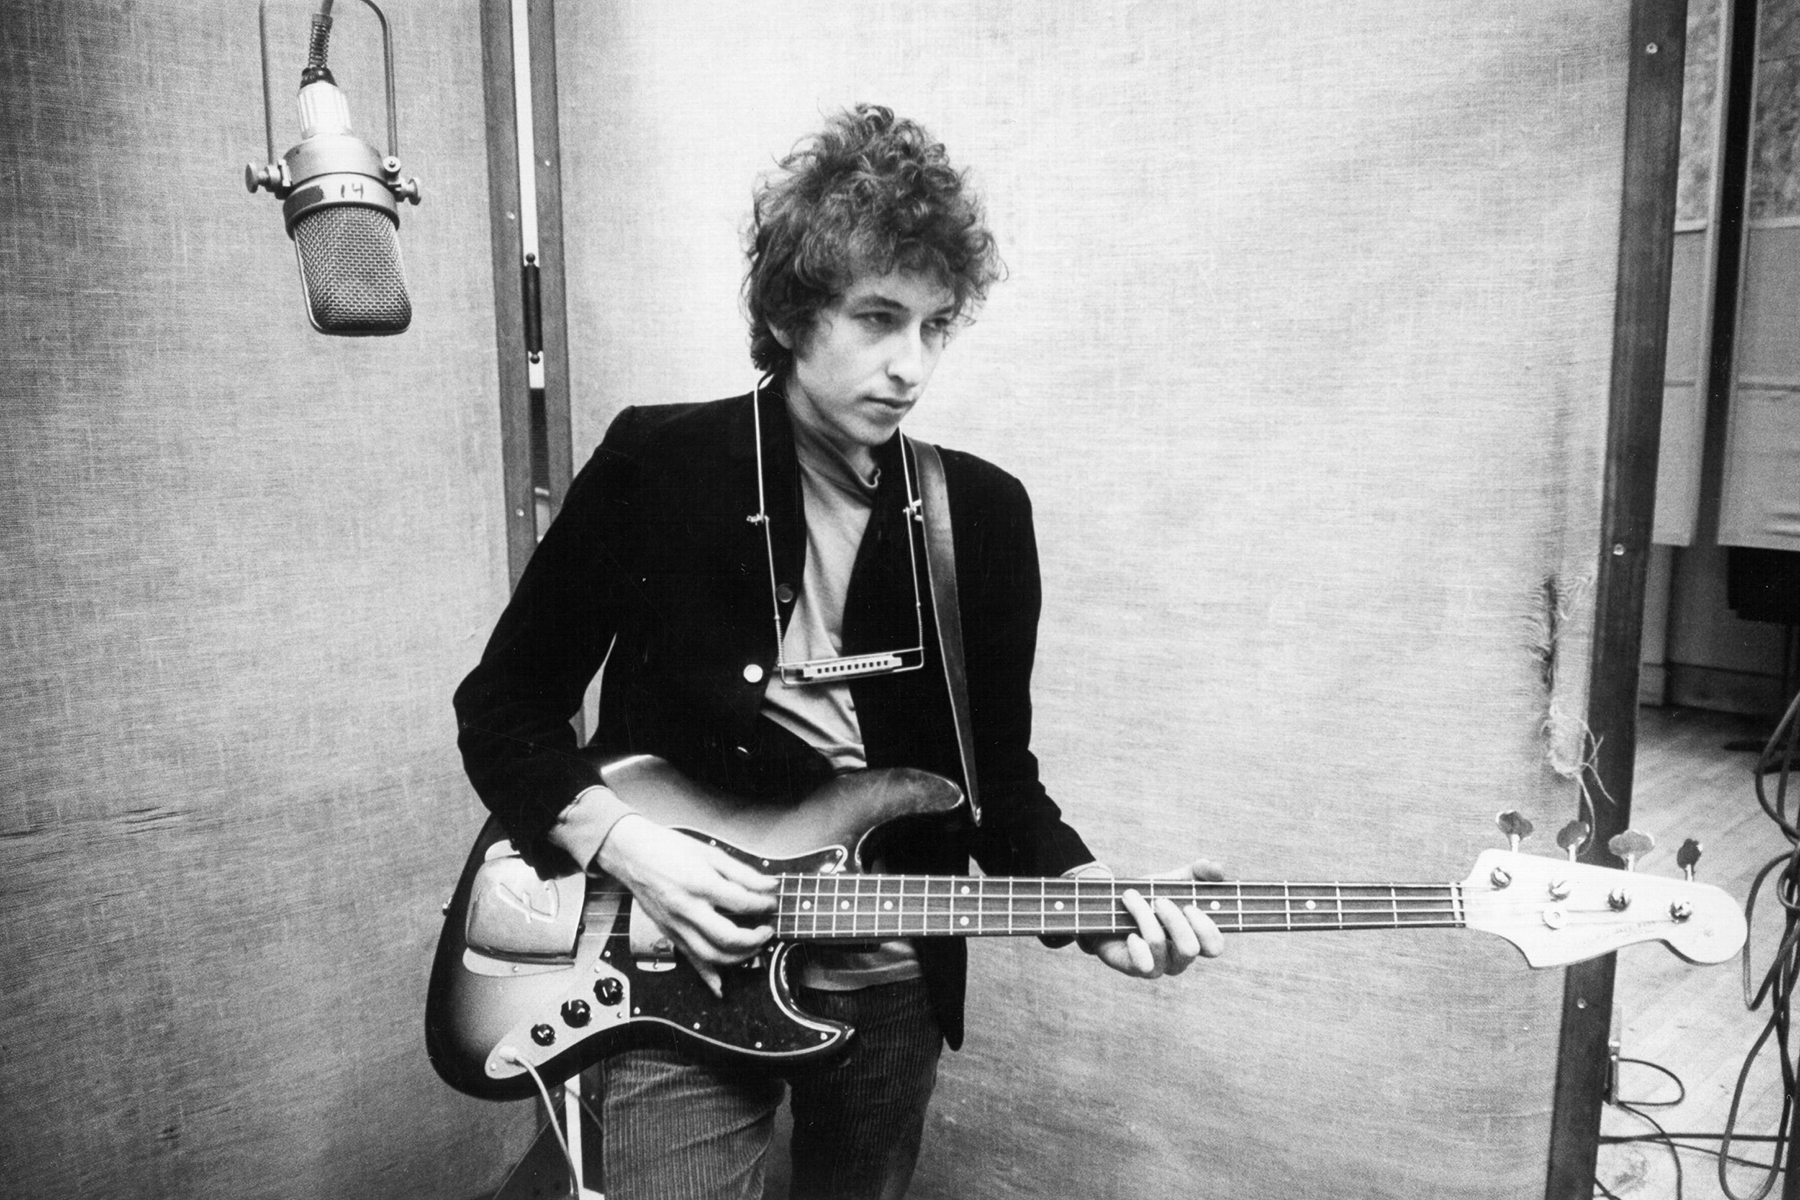 NEW YORK - JANUARY 13-15: Bob Dylan plays a Fender Jazz bass with the harmonica around his neck while recording his album 'Bringing It All Back Home' on January 13-15, 1965 in Columbia's Studio A in New York City, New York. (Photo by Michael Ochs Archives/Getty Images)